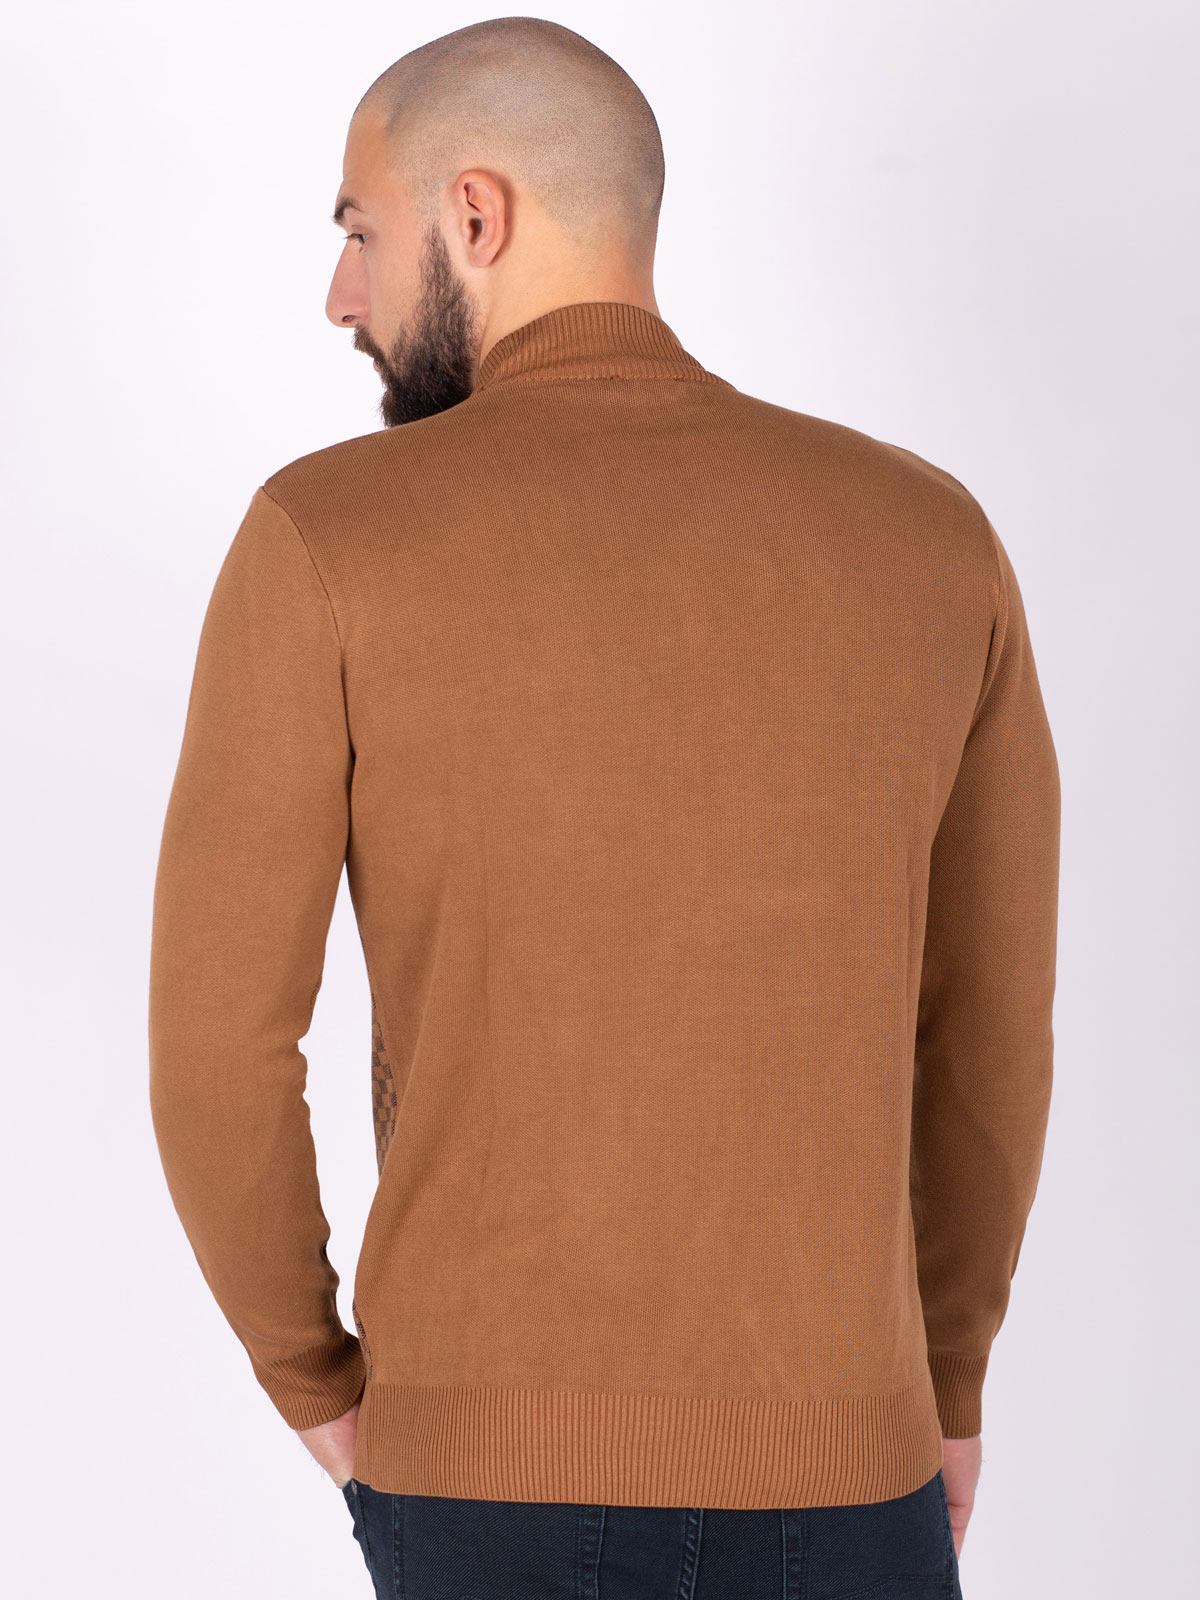 Polo shirt in brown with a checkered pat - 35303 € 38.81 img4